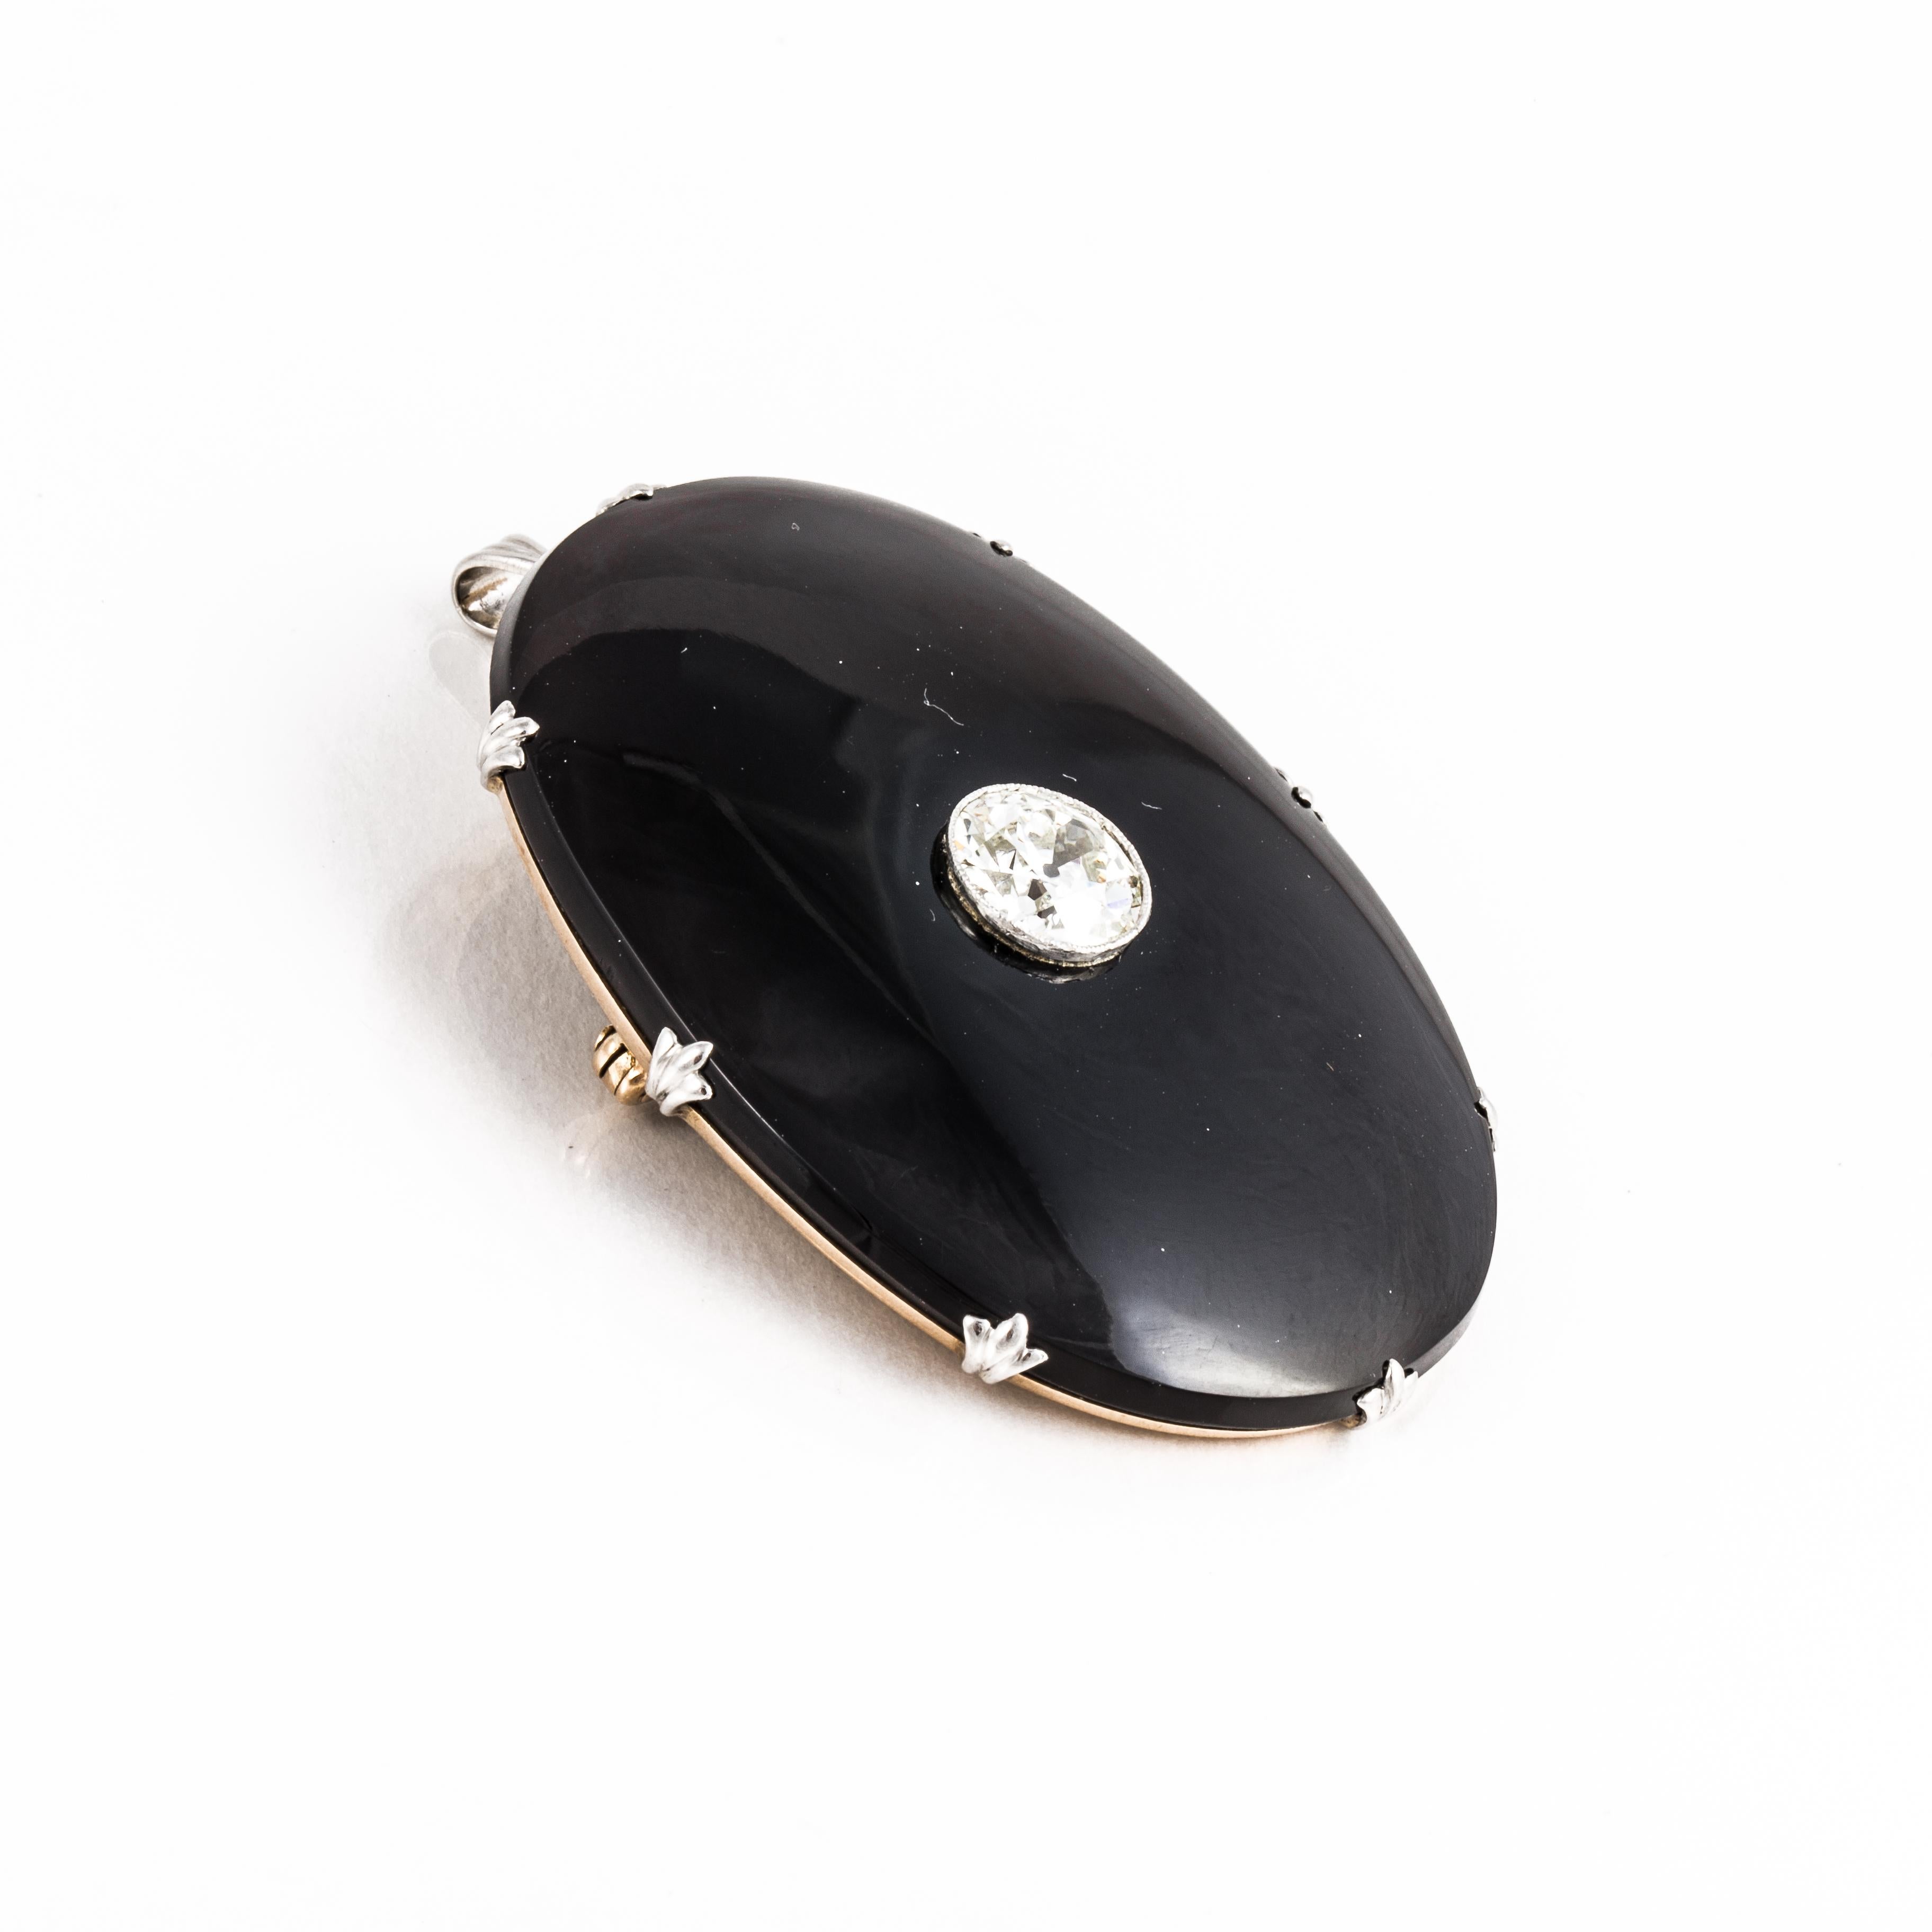 Art Deco brooch/pendant composed of 14K yellow and white gold with a large oval cut onyx featuring a round white zircon in the center.  The piece is marked 